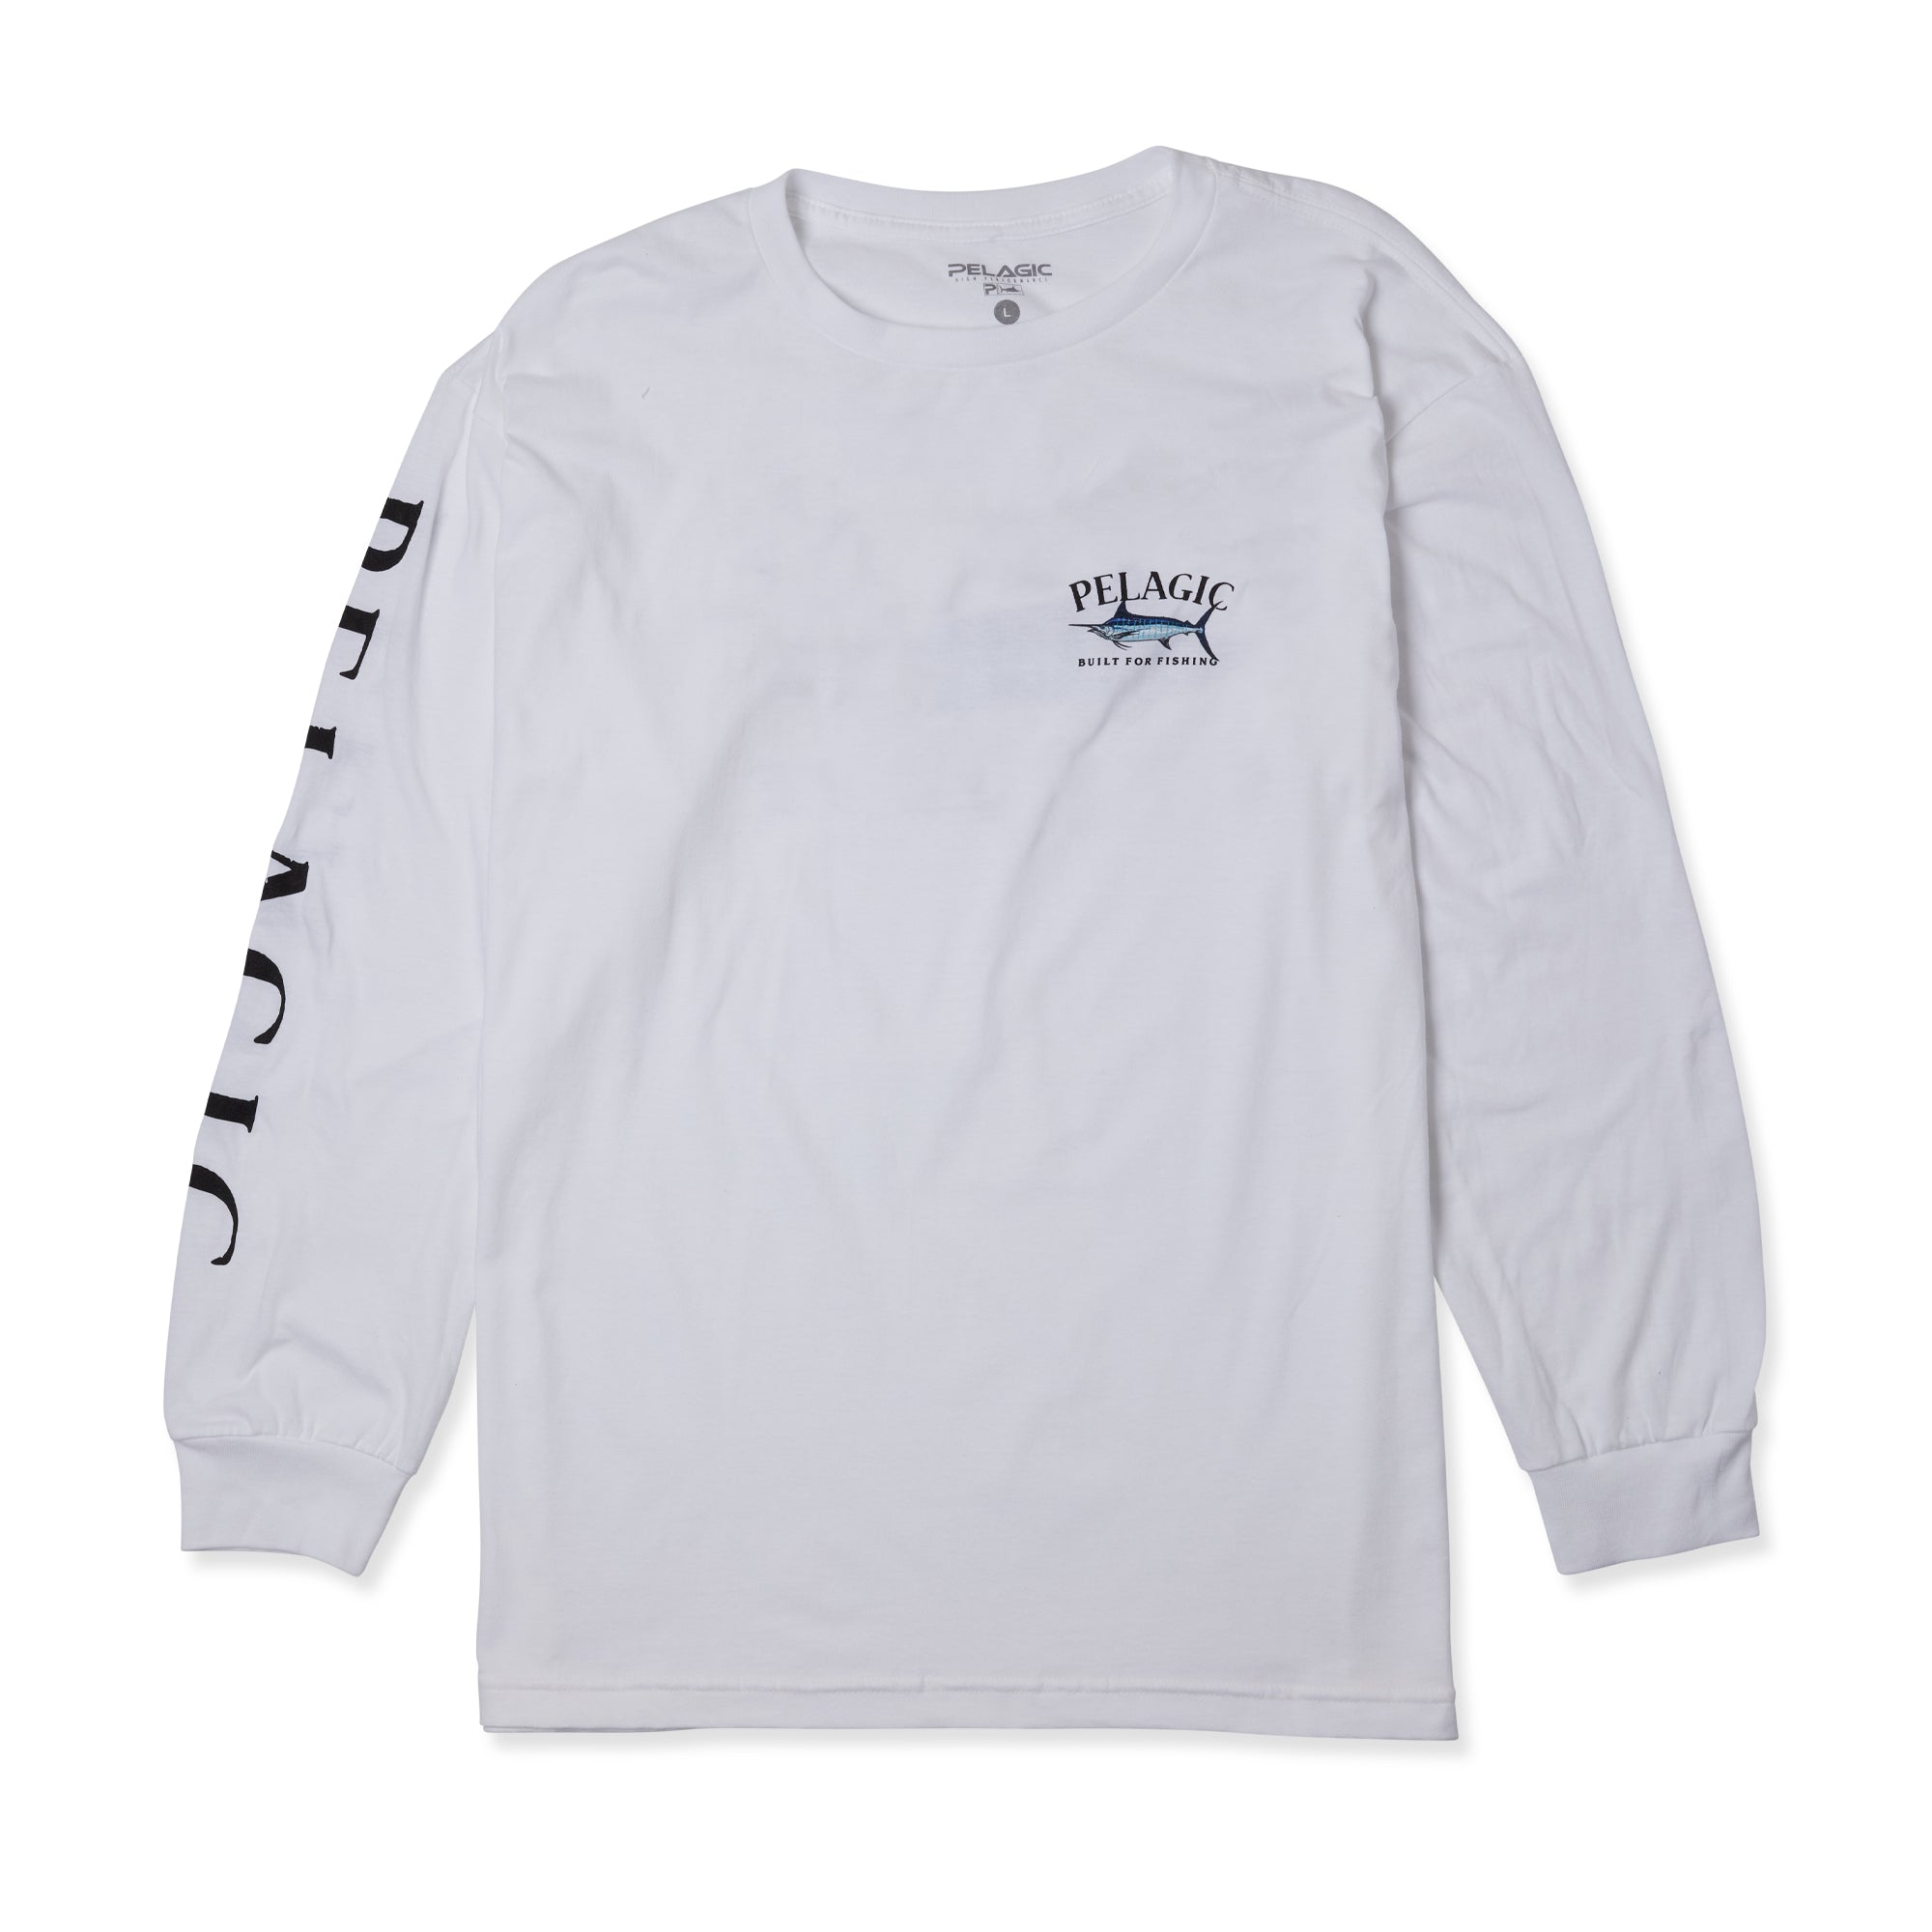  Crazy Tuna Fight Deep Sea Saltwater Fishing Long Sleeve T-Shirt  : Clothing, Shoes & Jewelry